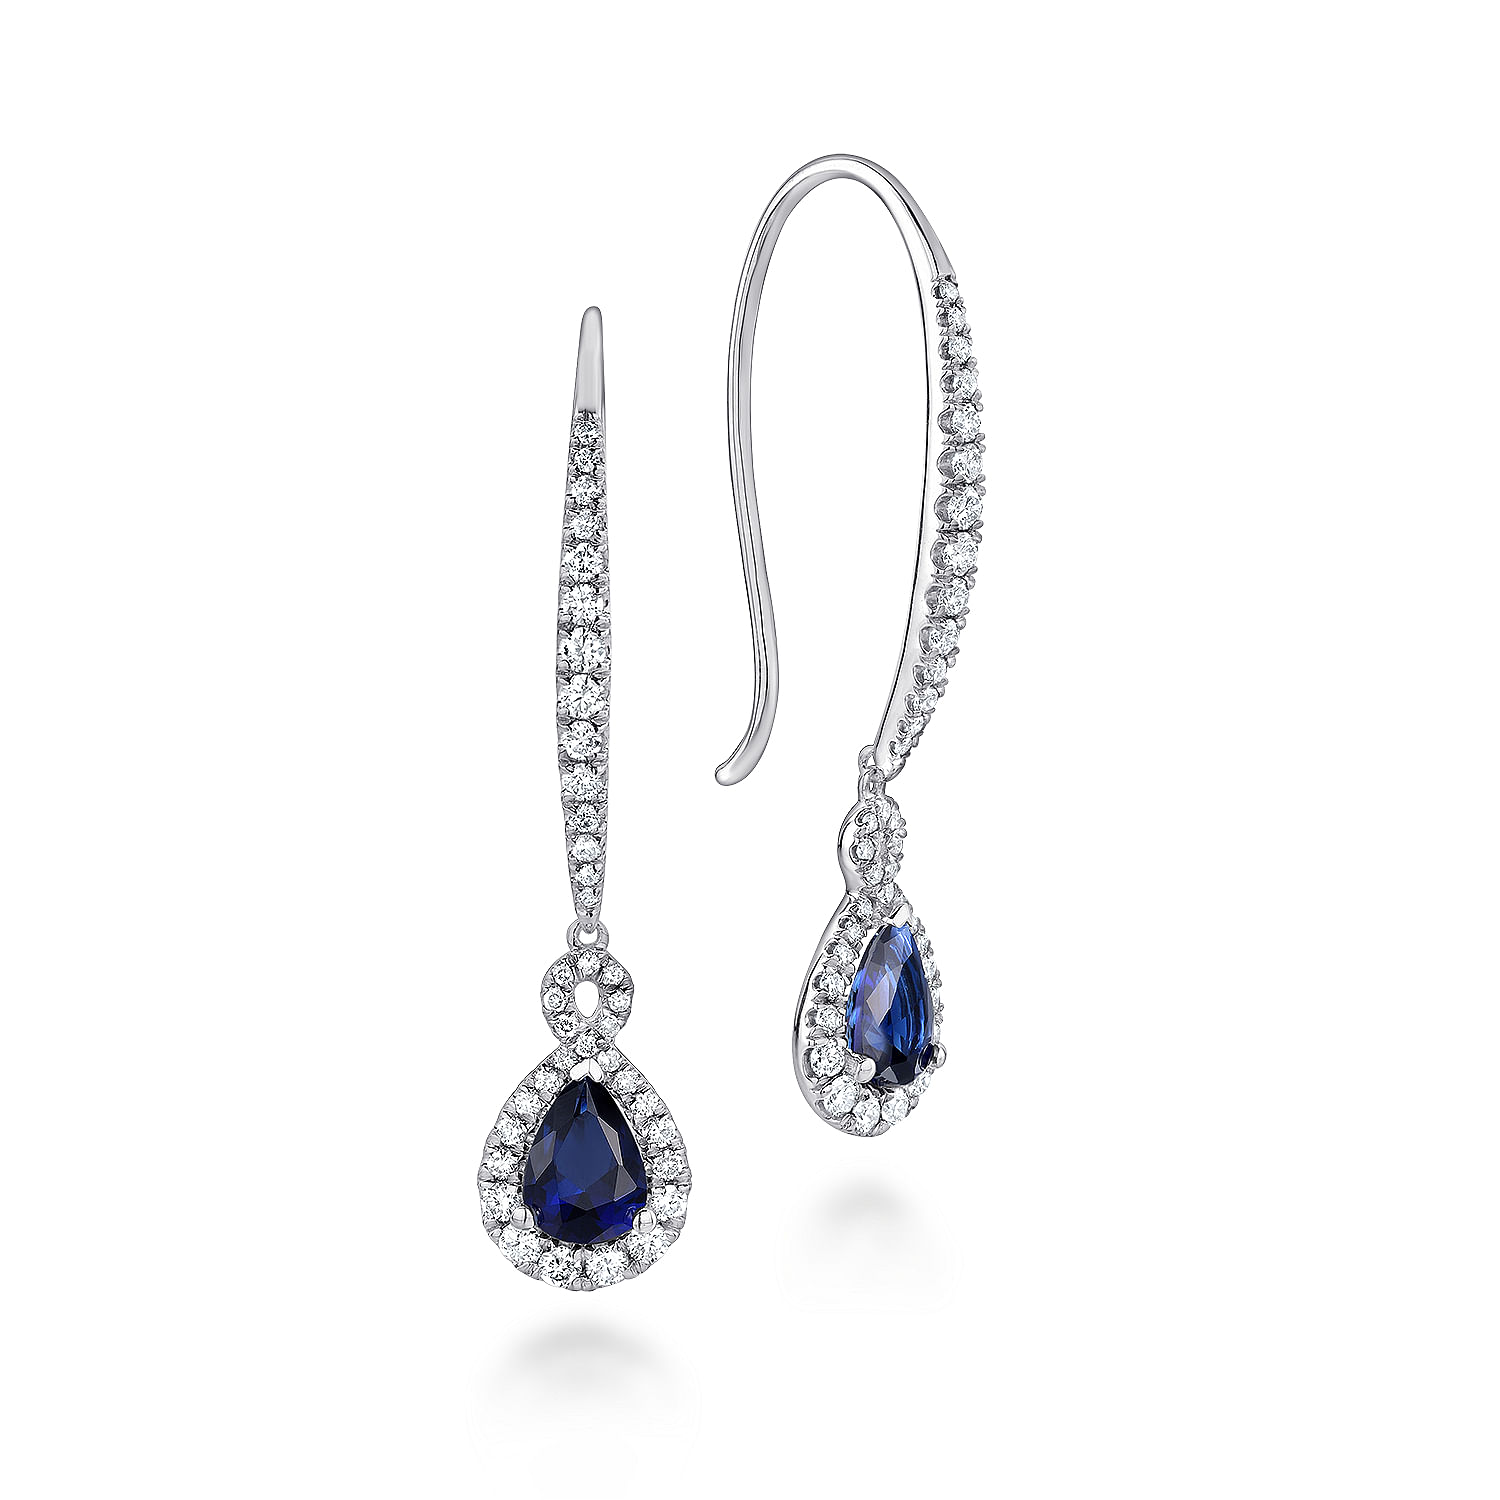 14K White Gold Diamond and Pear Shaped Sapphire Fish Wire Drop Earrings